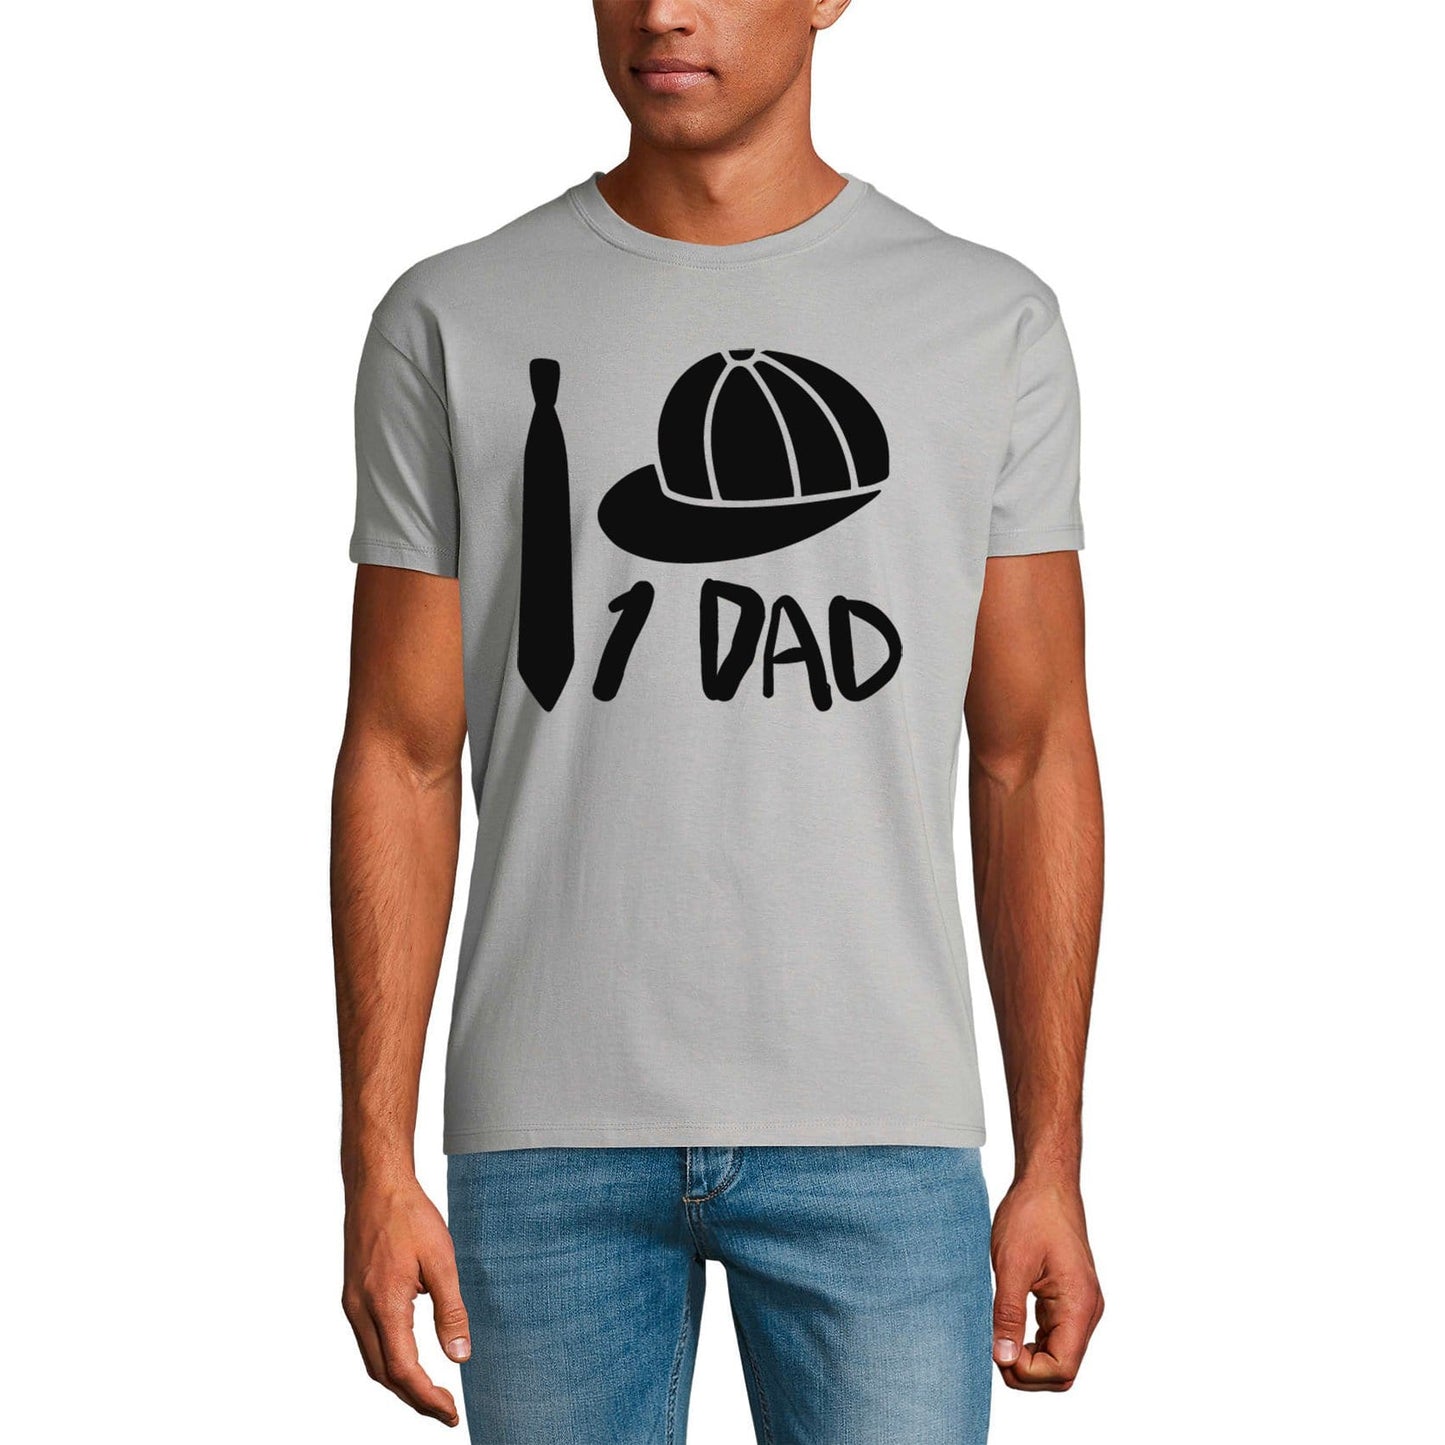 ULTRABASIC Men's Graphic T-Shirt 1 Dad - Funny Daddy Sport Shirt - Father's Day